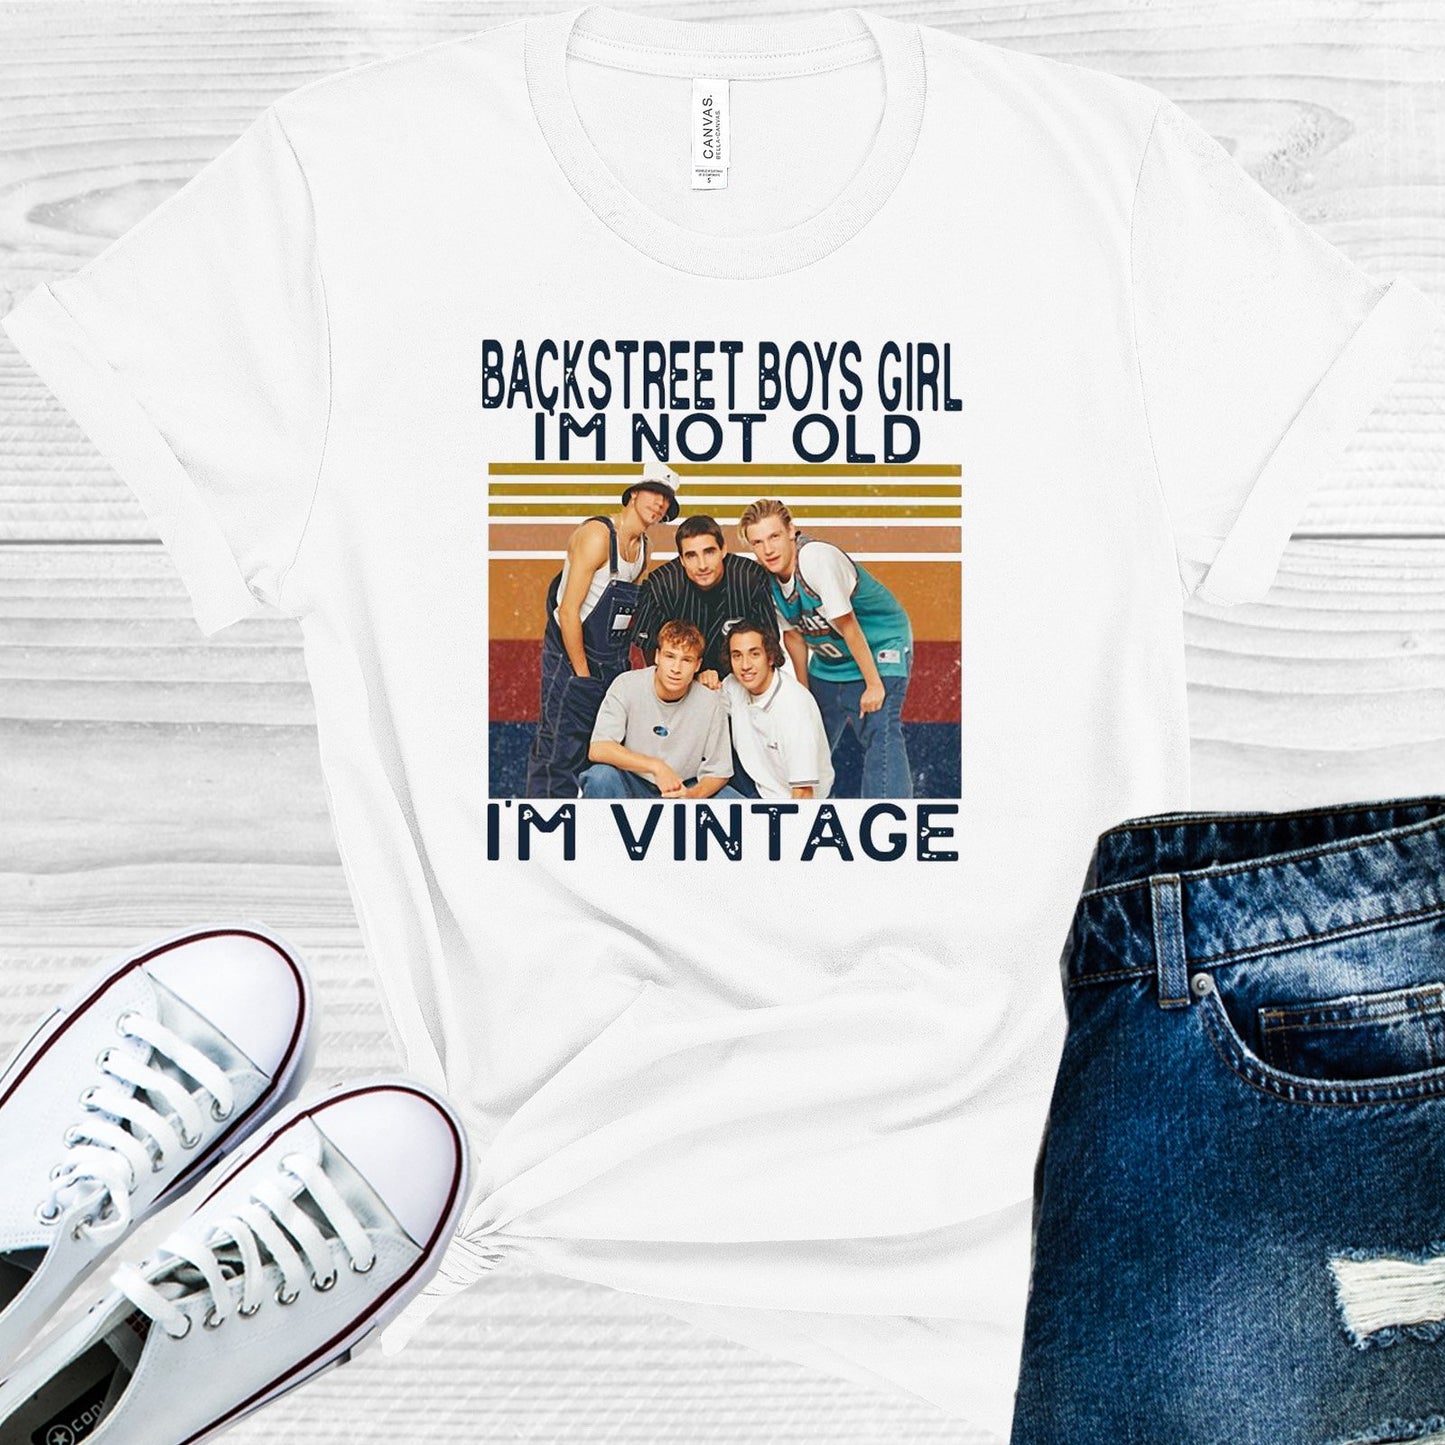 Backstreet Boys Girl Im Not Old Vintage Graphic Tee Graphic Tee